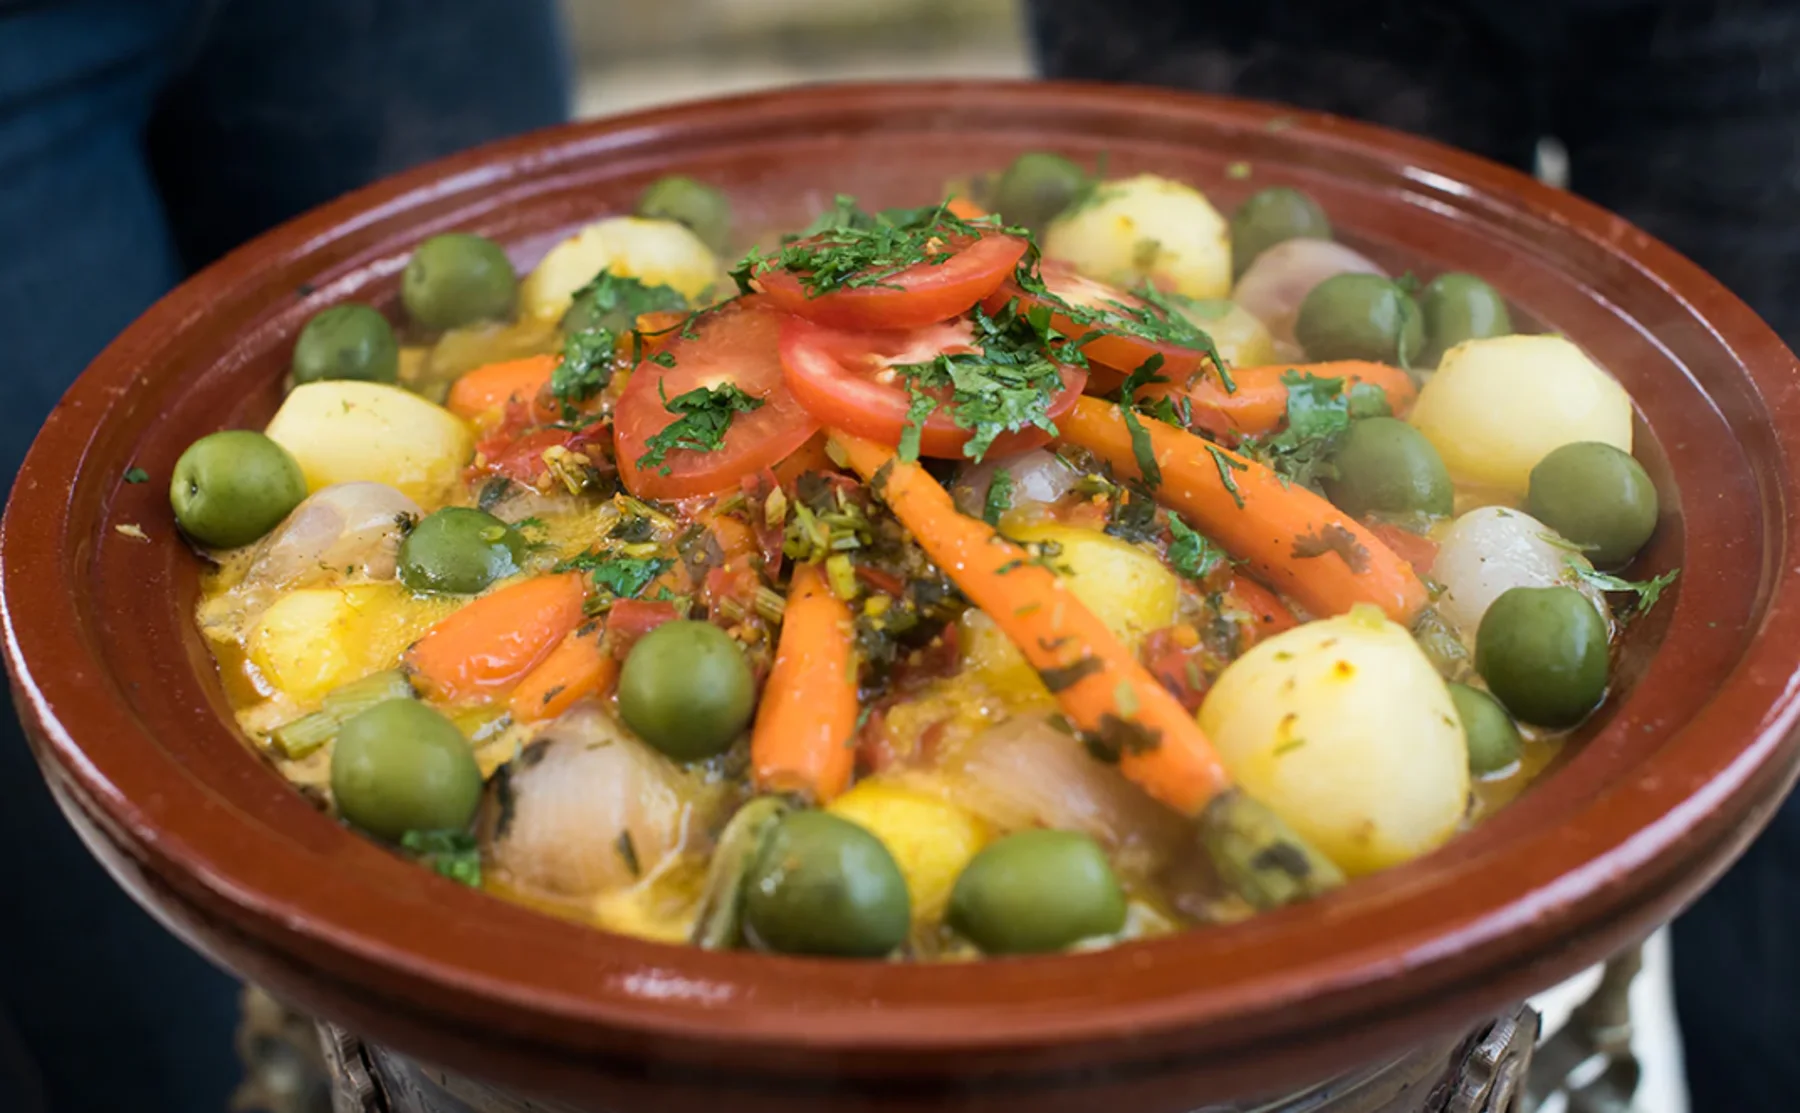 After hours Delightful Moroccan tagine in fes cooking class - 1373165